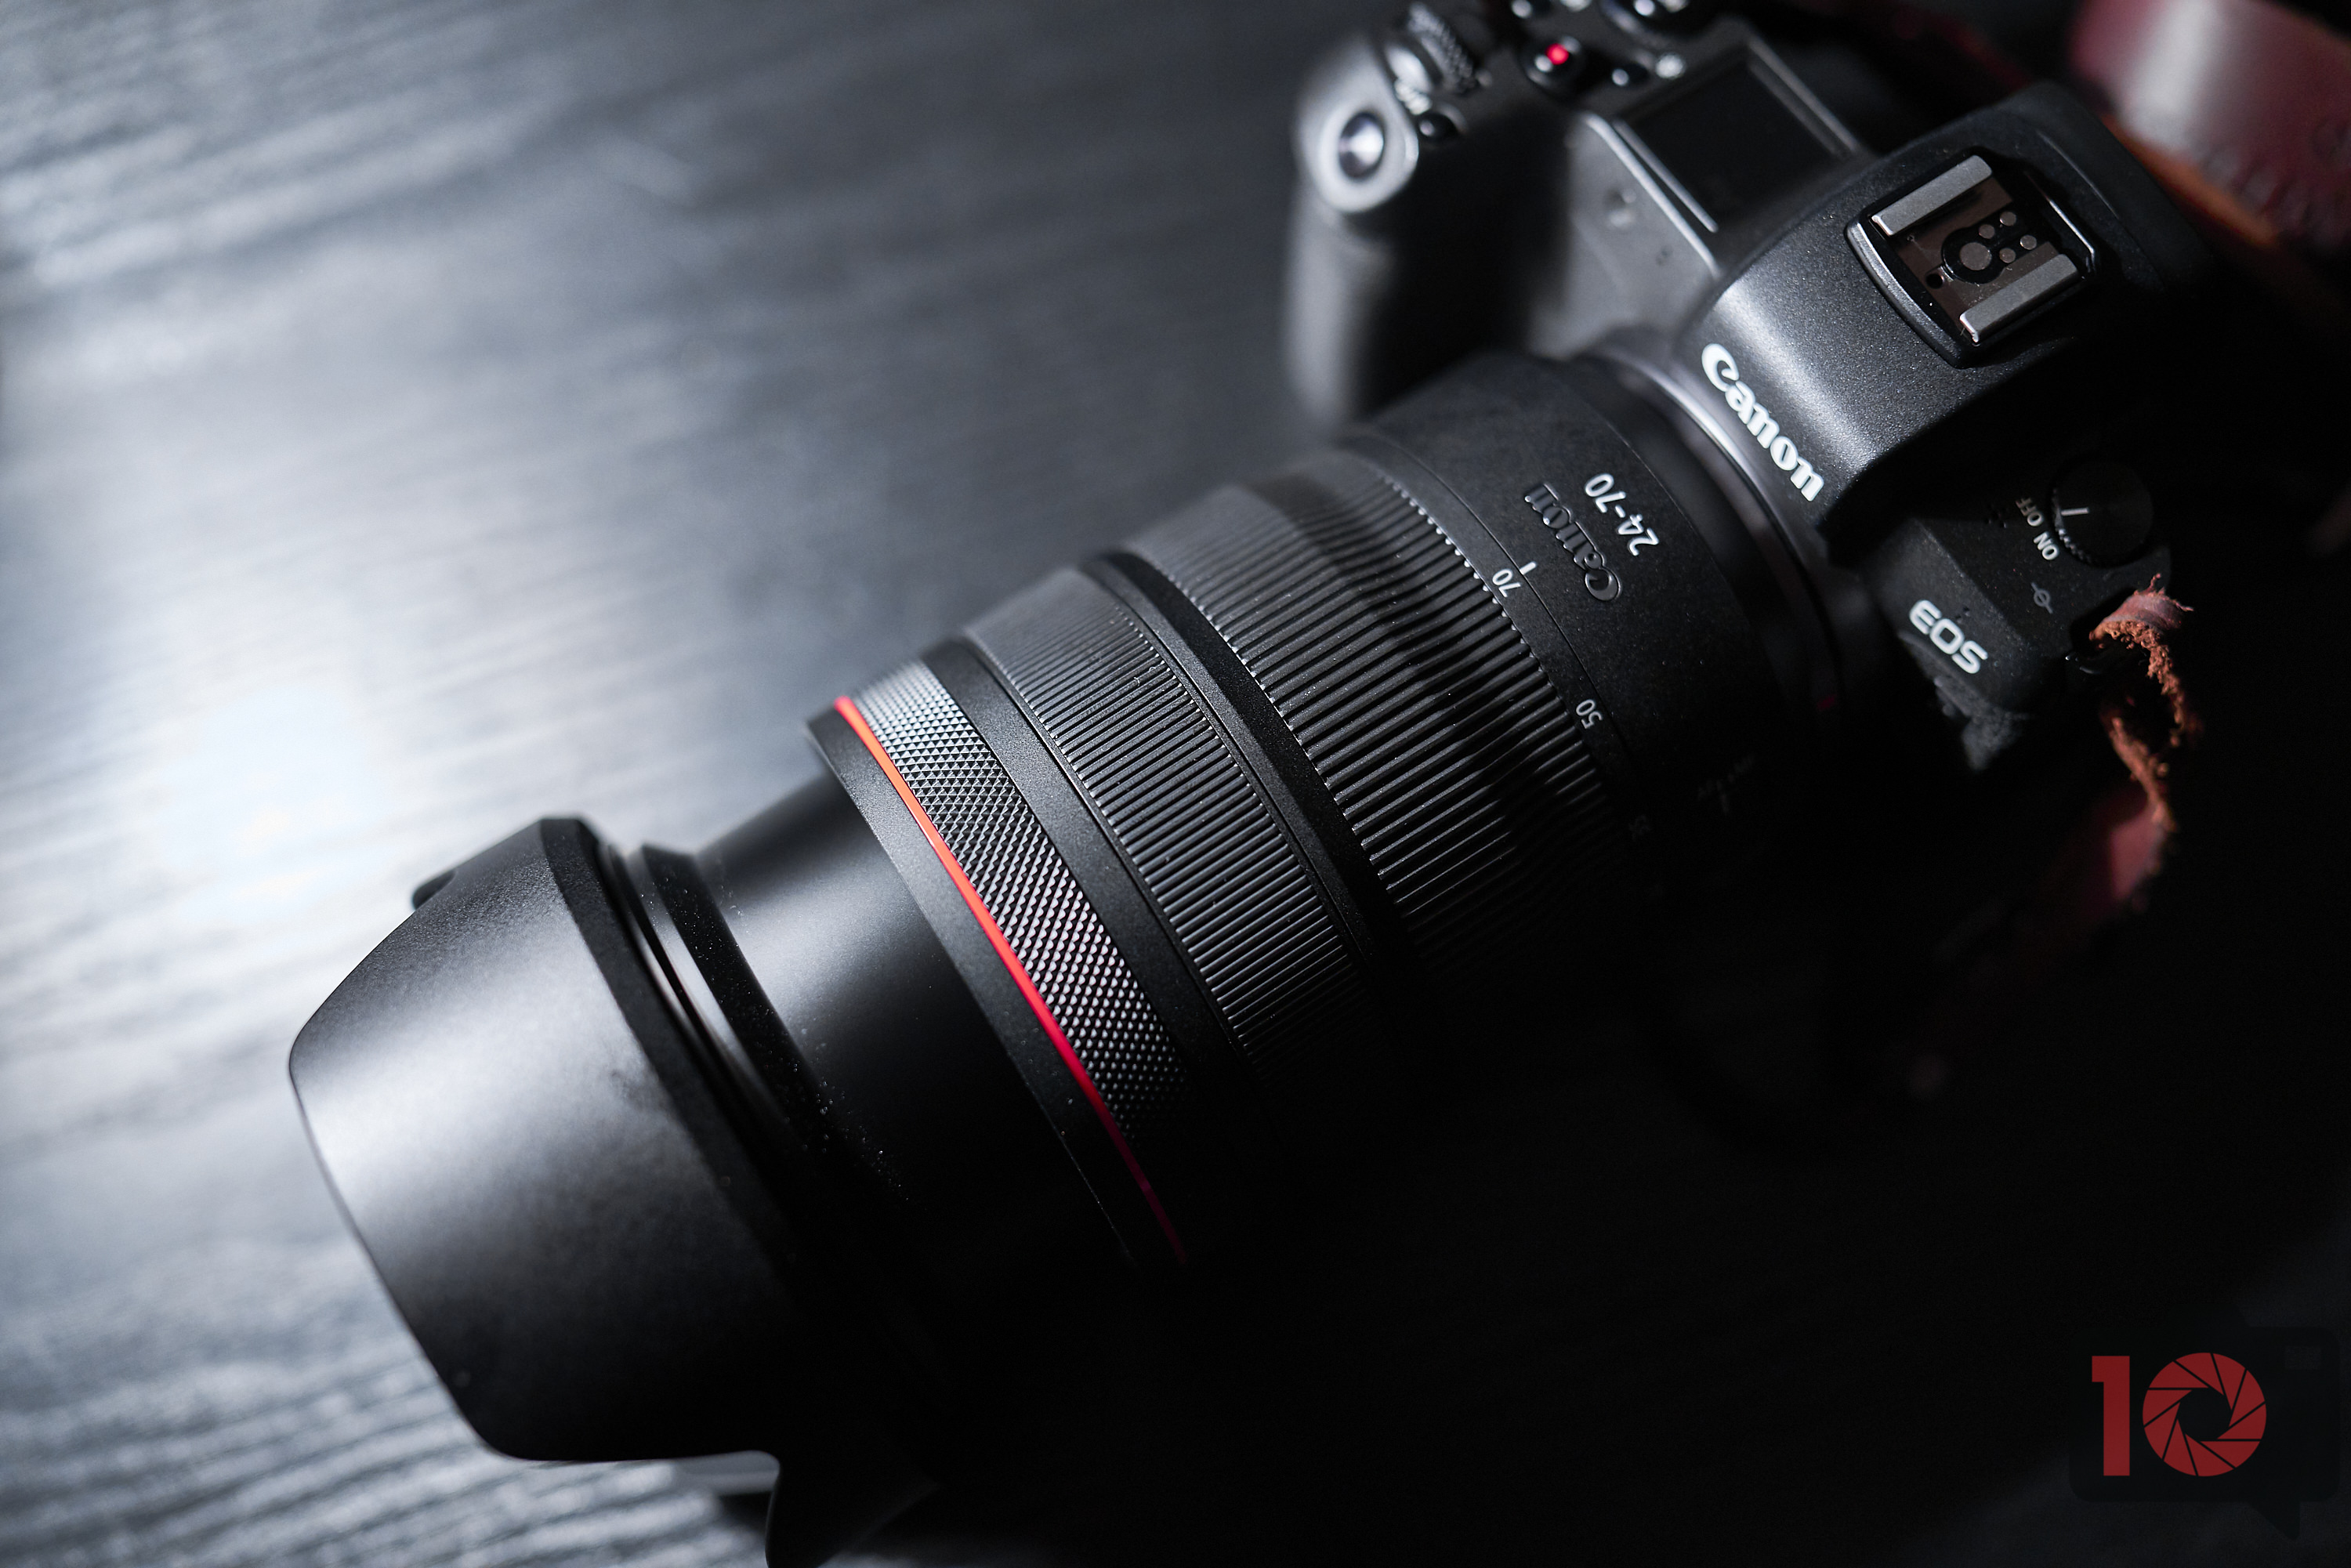 Review: Canon RF 24-70mm f2.8 L IS USM (This Lens Will Grow on You)